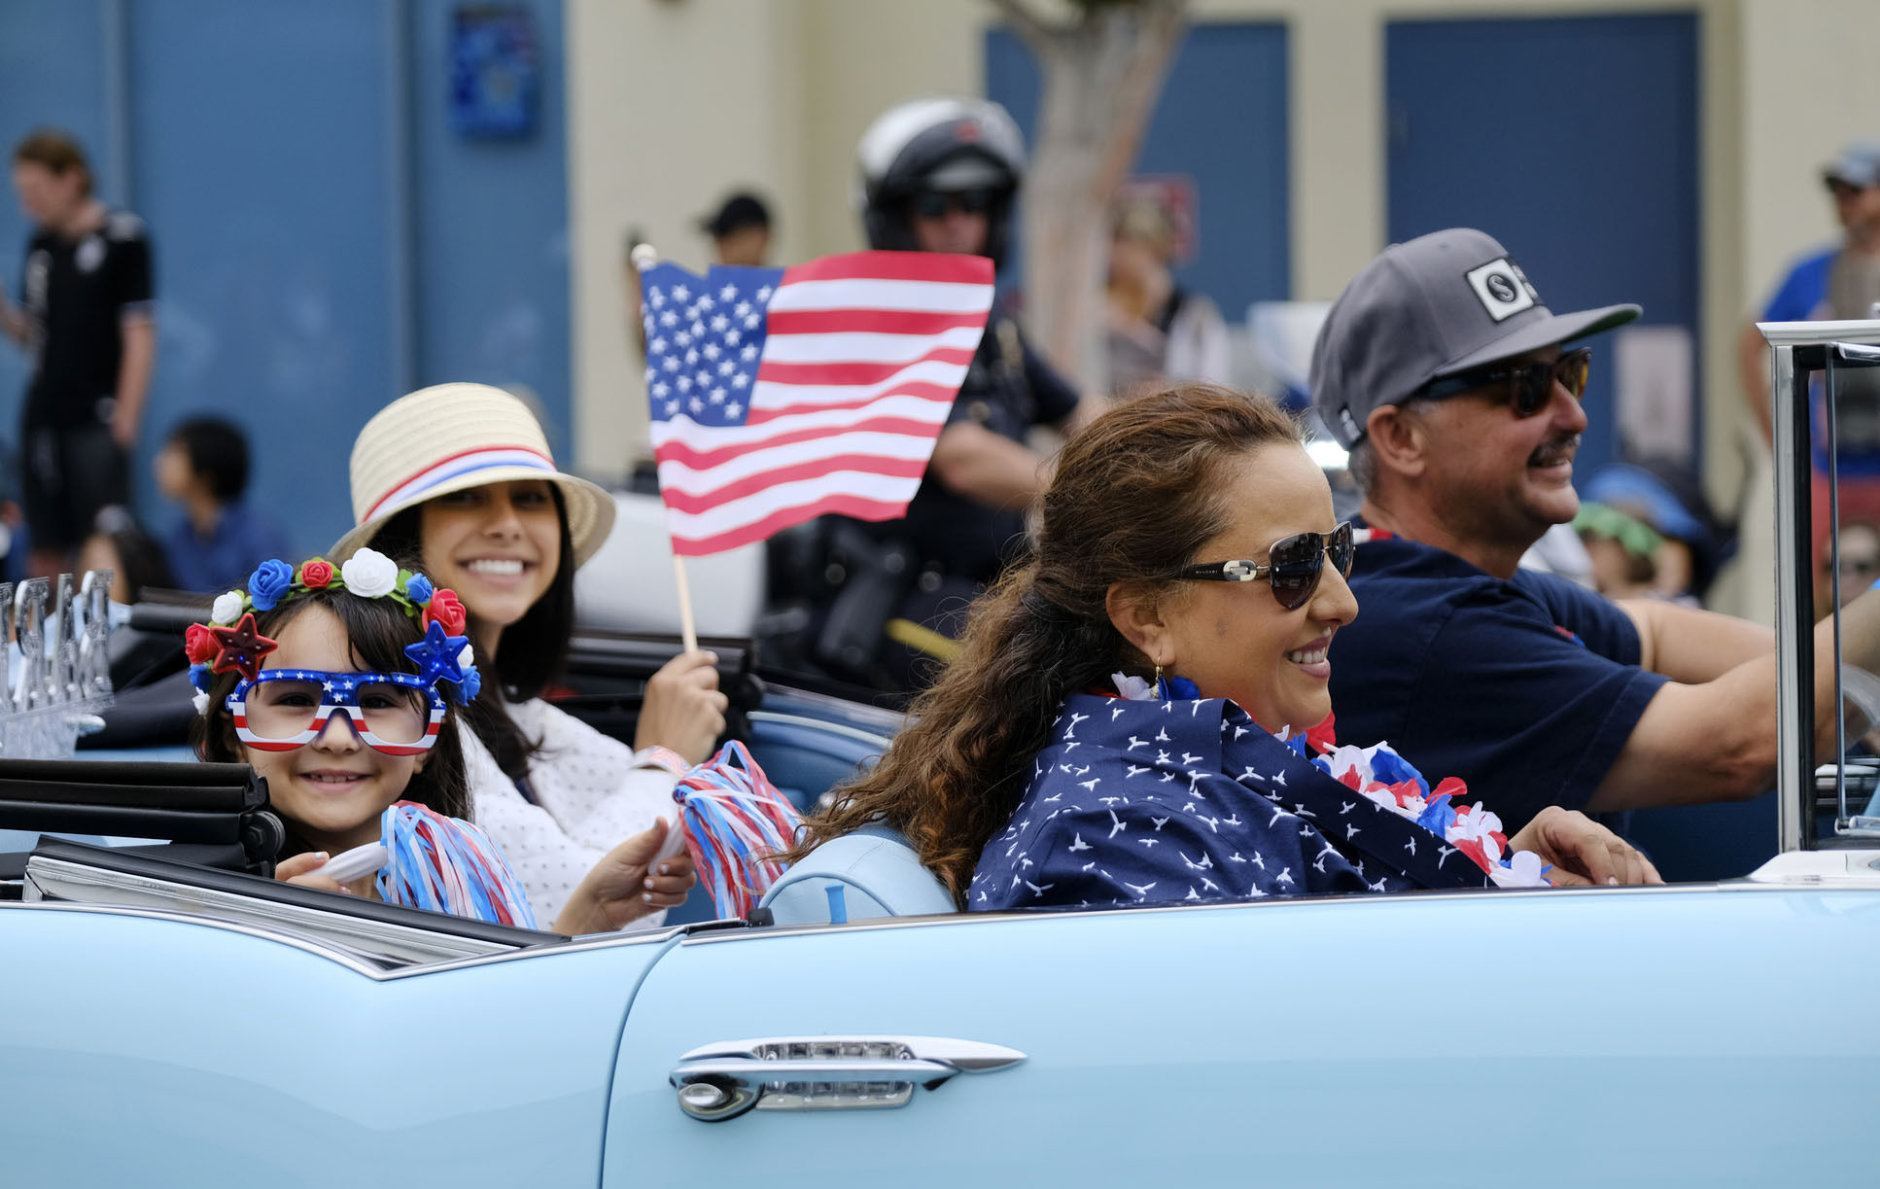 Sophie Barba, 8, left, joins her family in their classic car to celebrate the nation's birthday during the Santa Monica Fourth of July Parade in Santa Monica, Calif., on Thursday, July 4, 2019 in Santa Monica, Calif. (AP Photo/Richard Vogel)